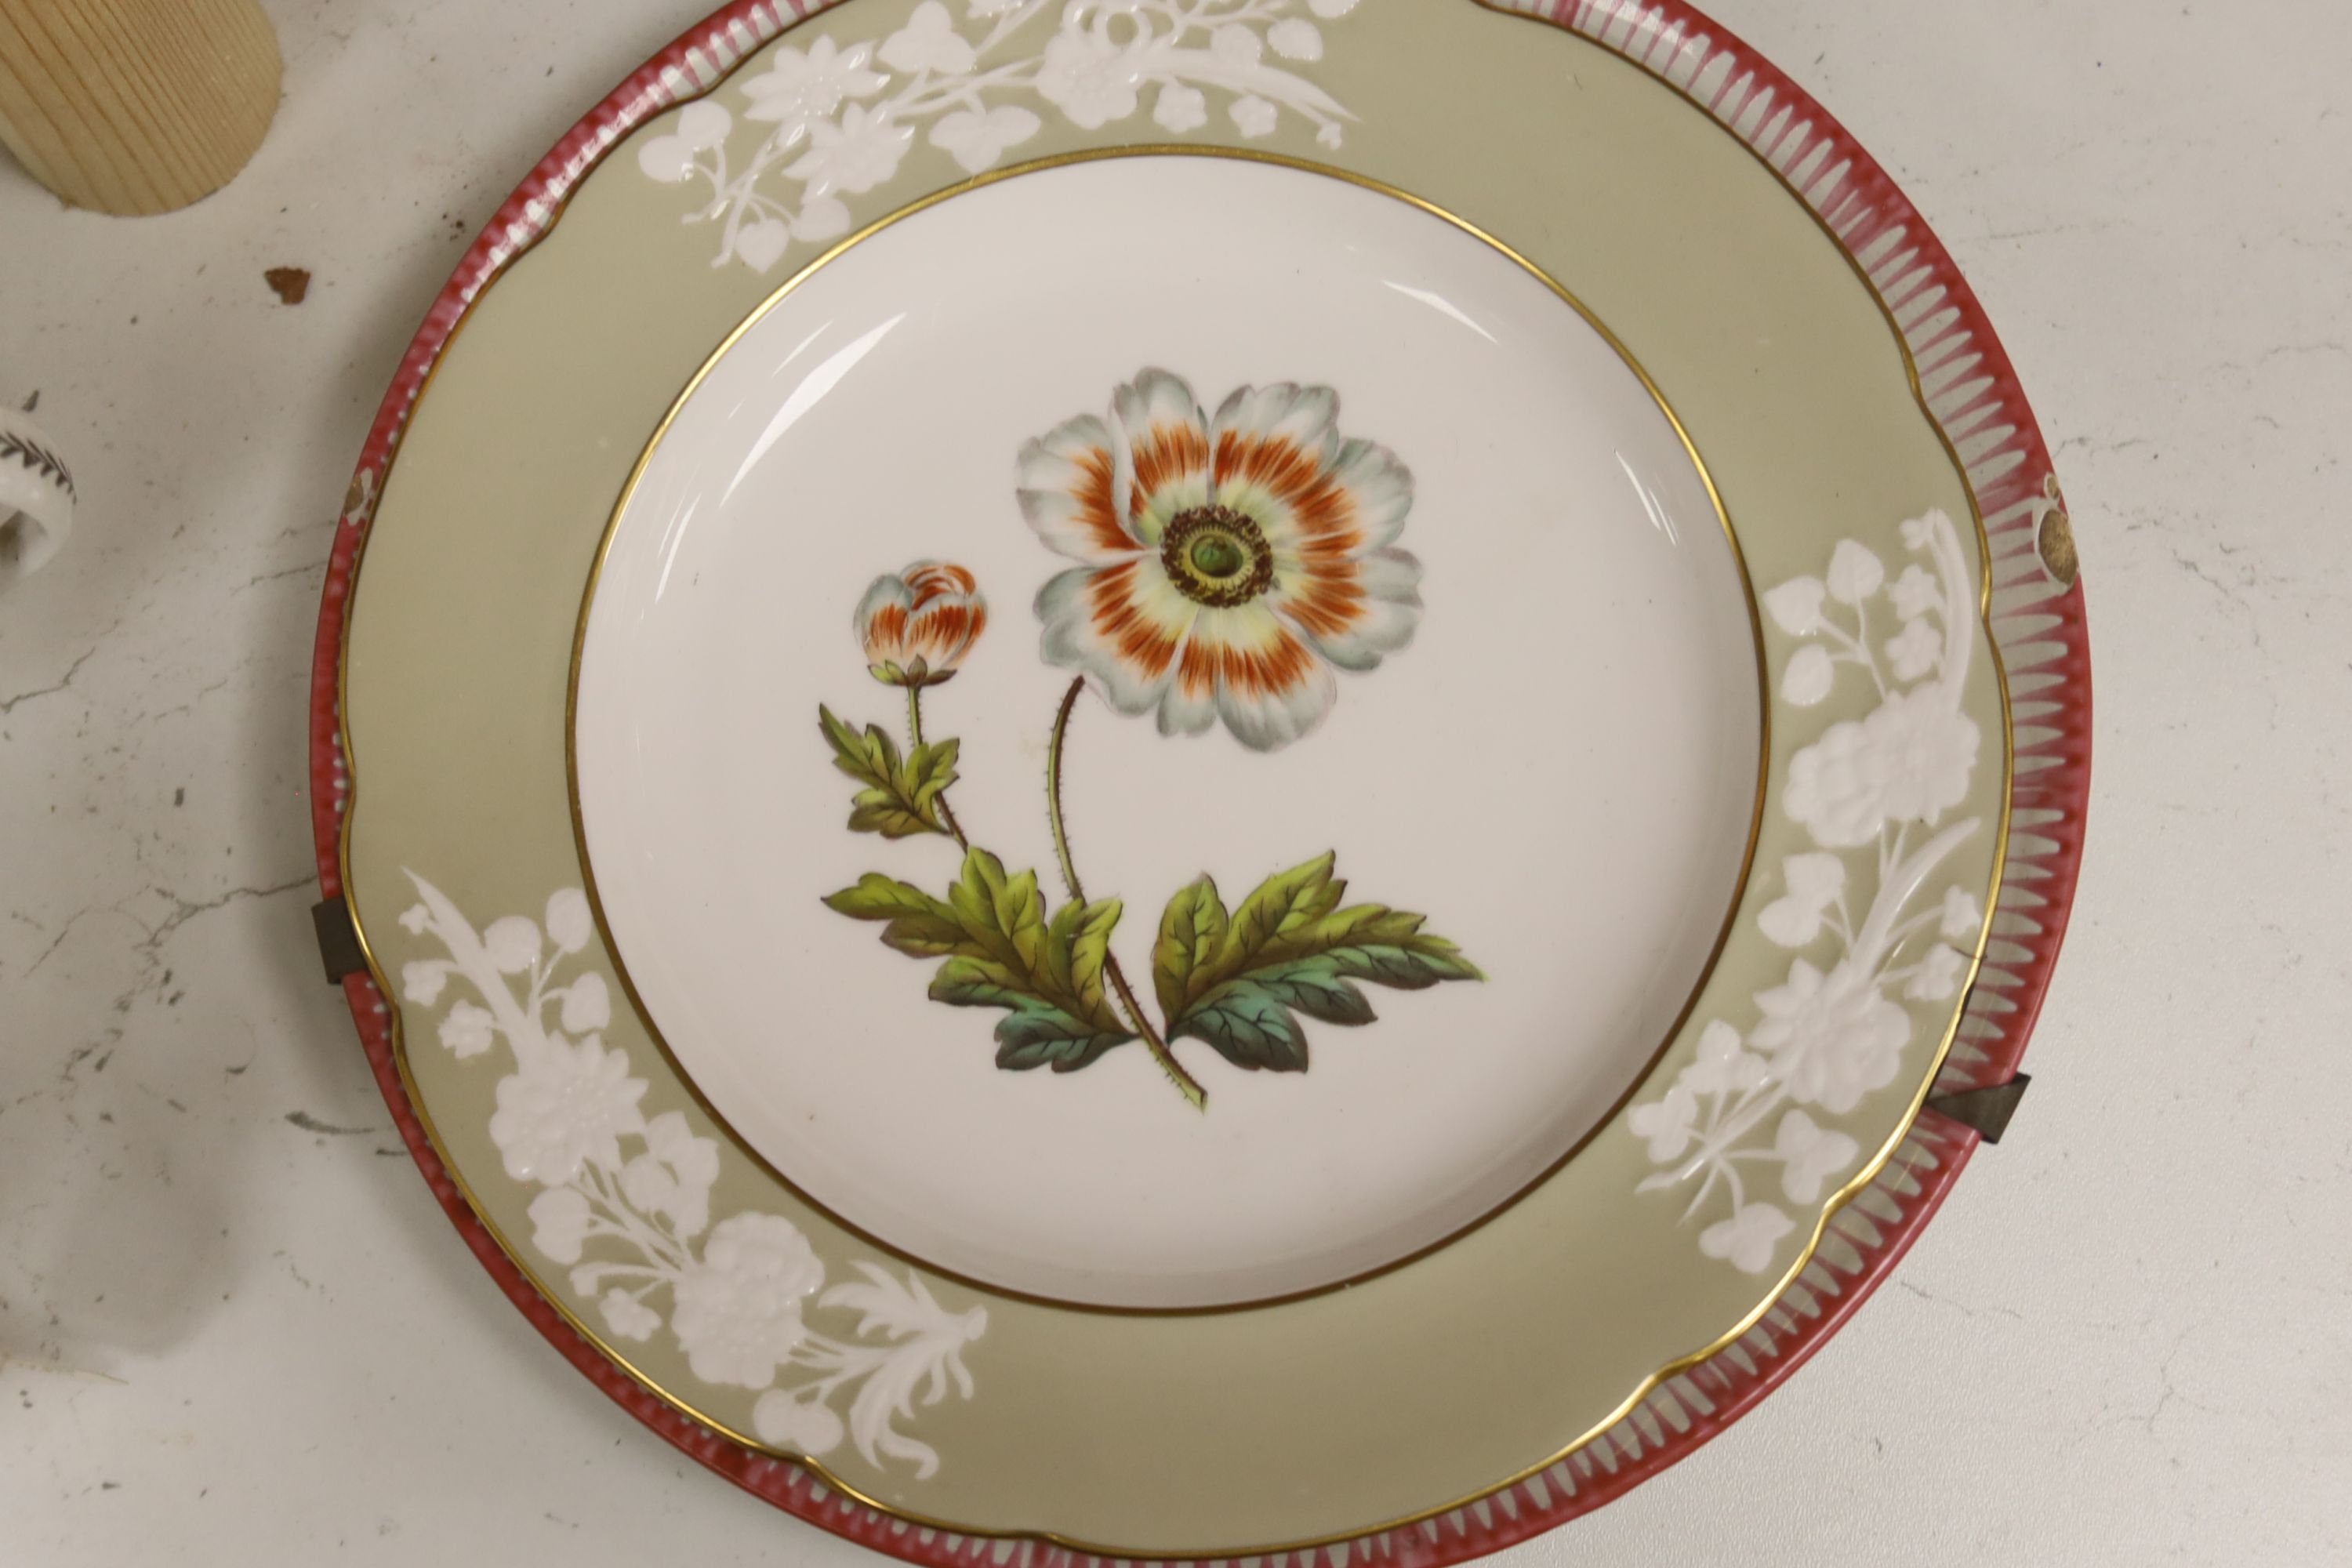 A group of late 18th / early 19th century English porcelain teaware and plates